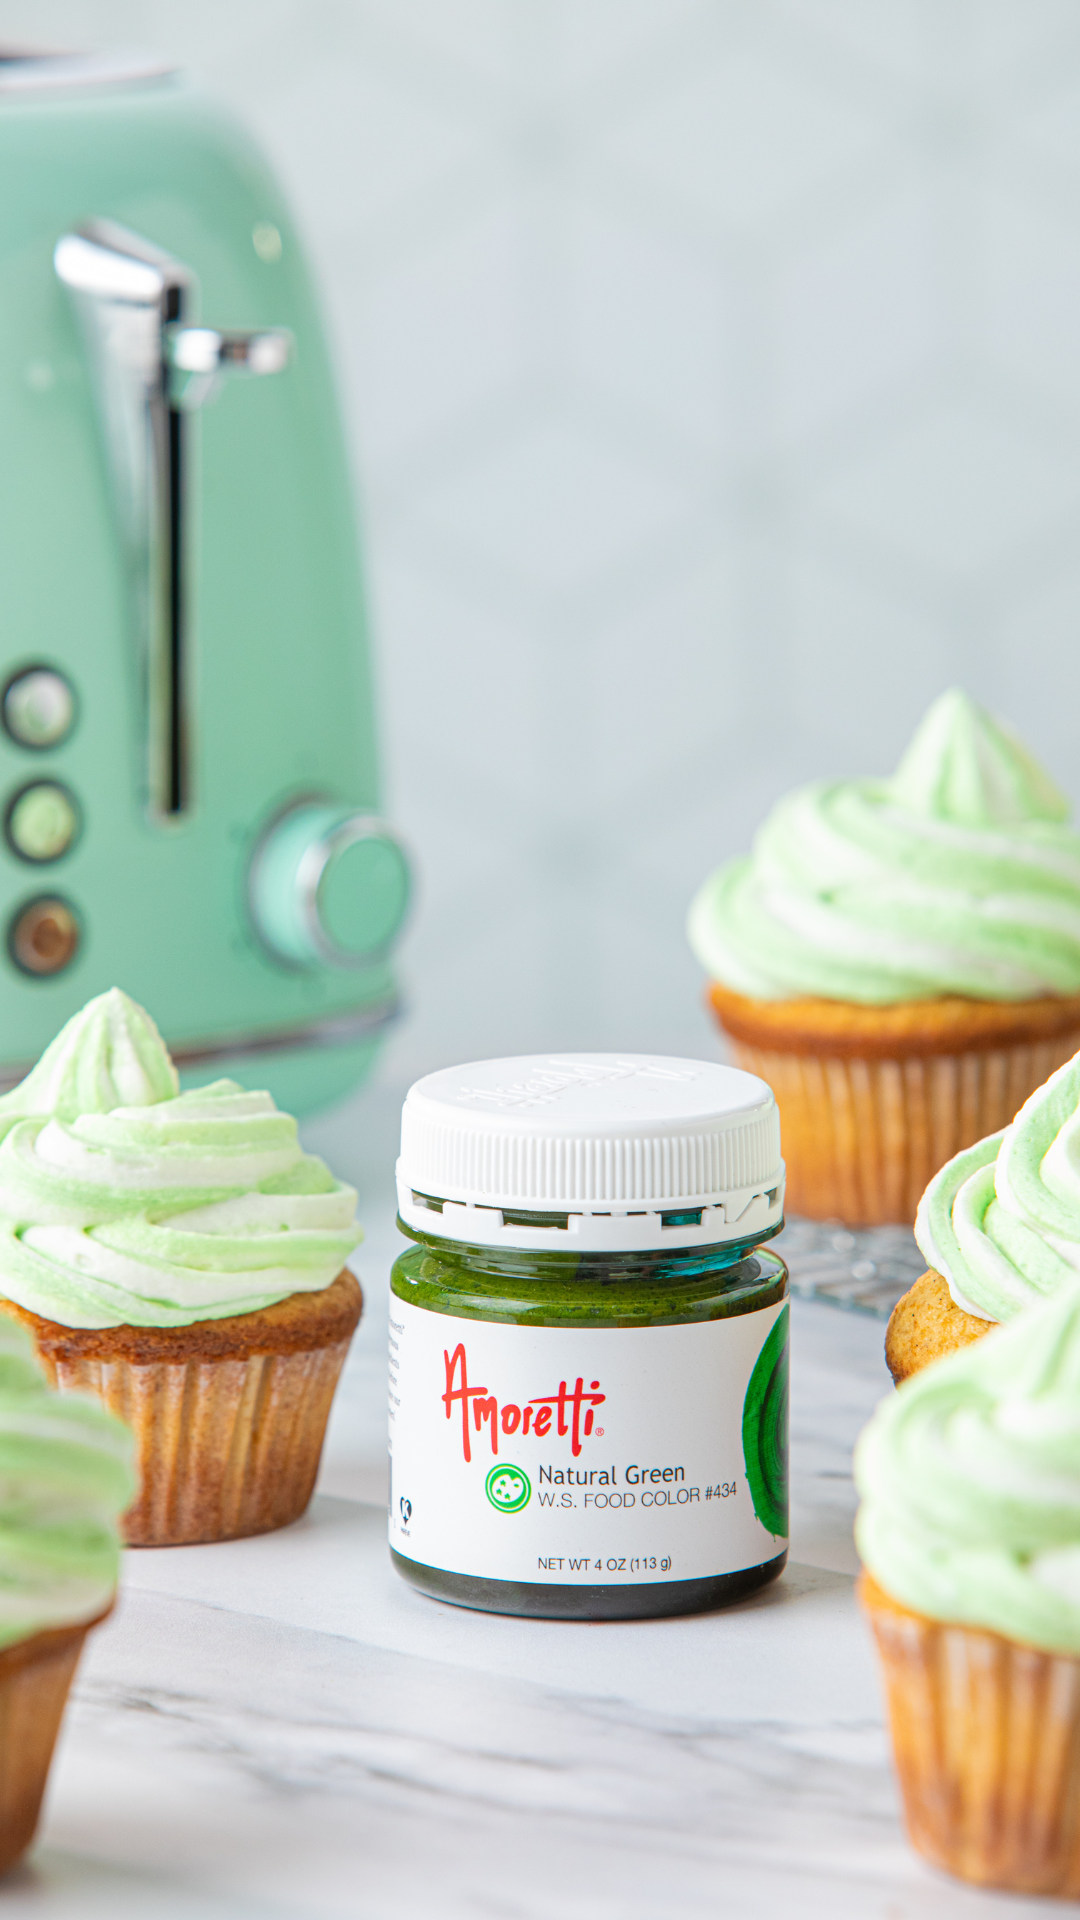 Amoretti Natural Green Food Coloring next to Creme De Menthe Cupcakes